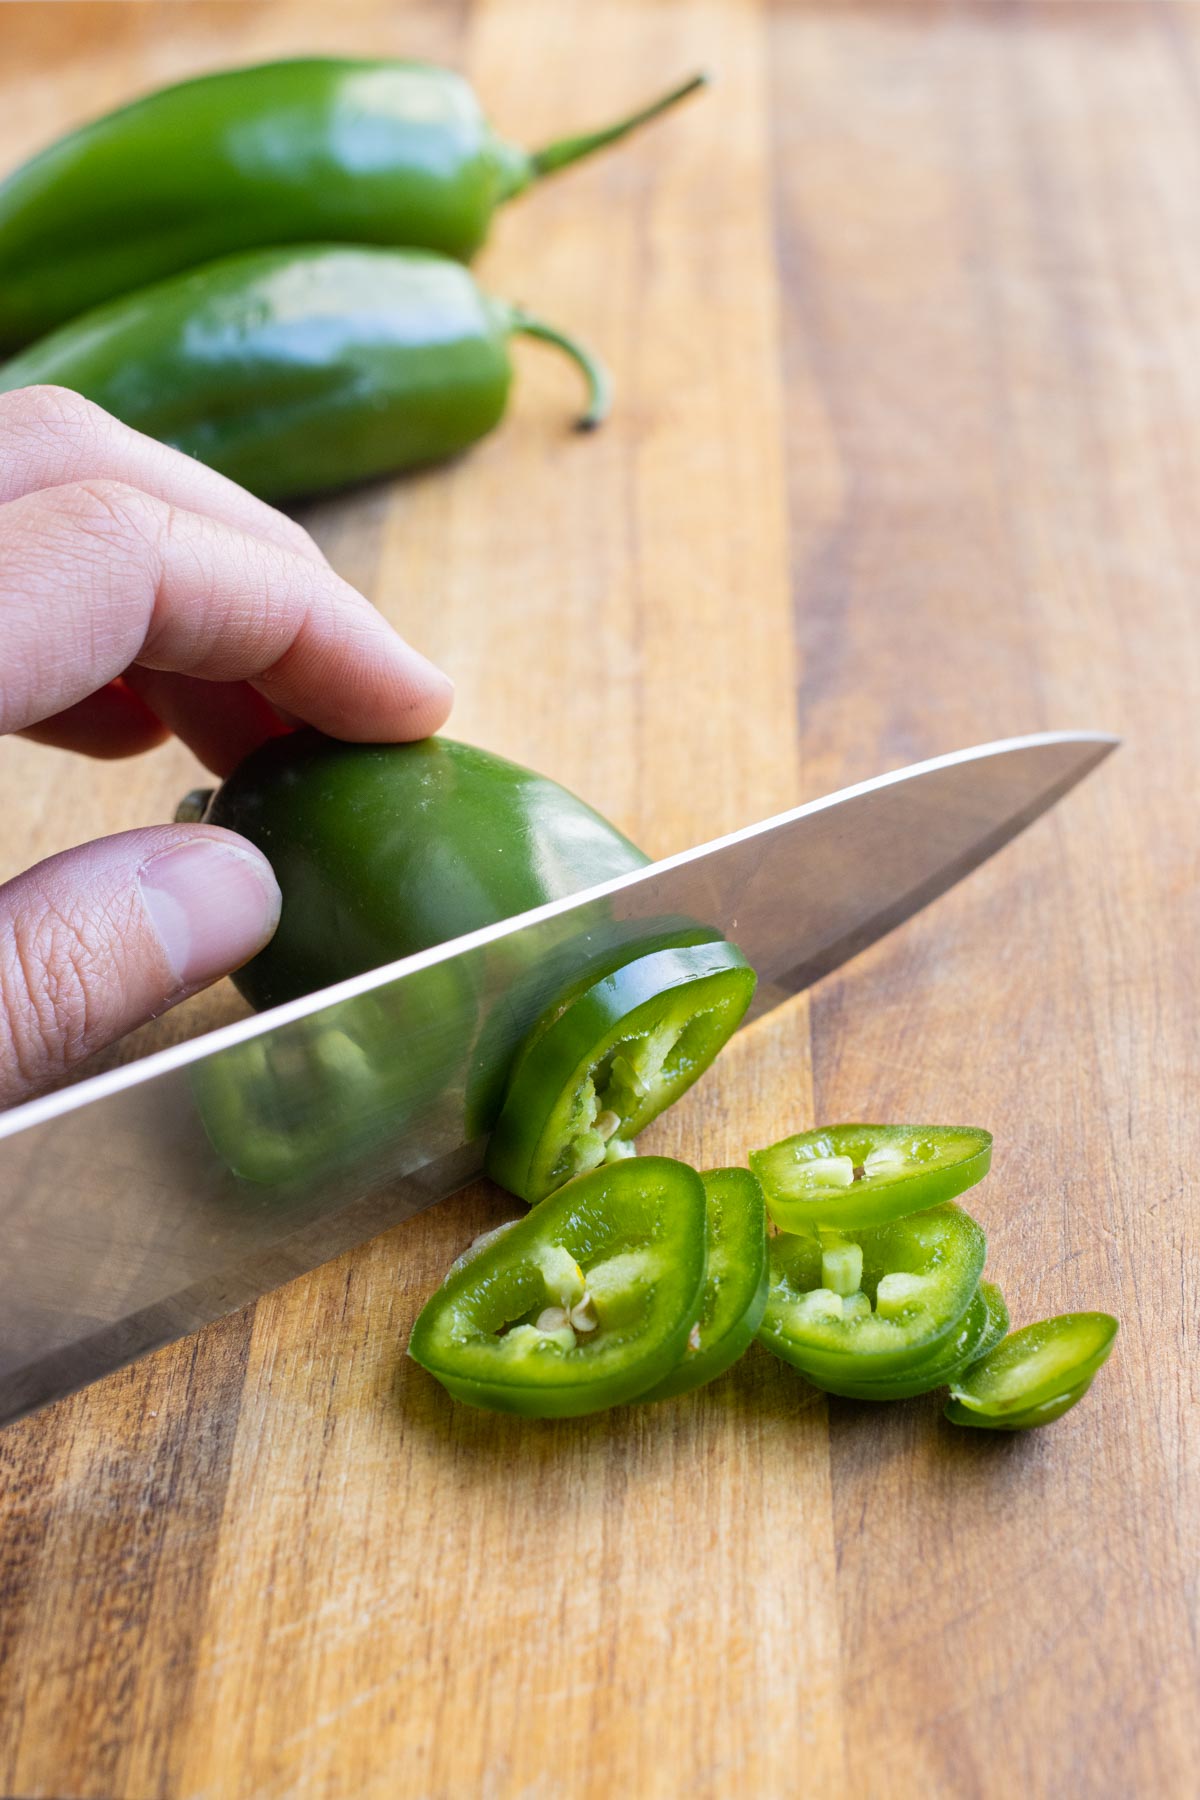 A sharp knife slices a jalapeño on a wooden cutting board.